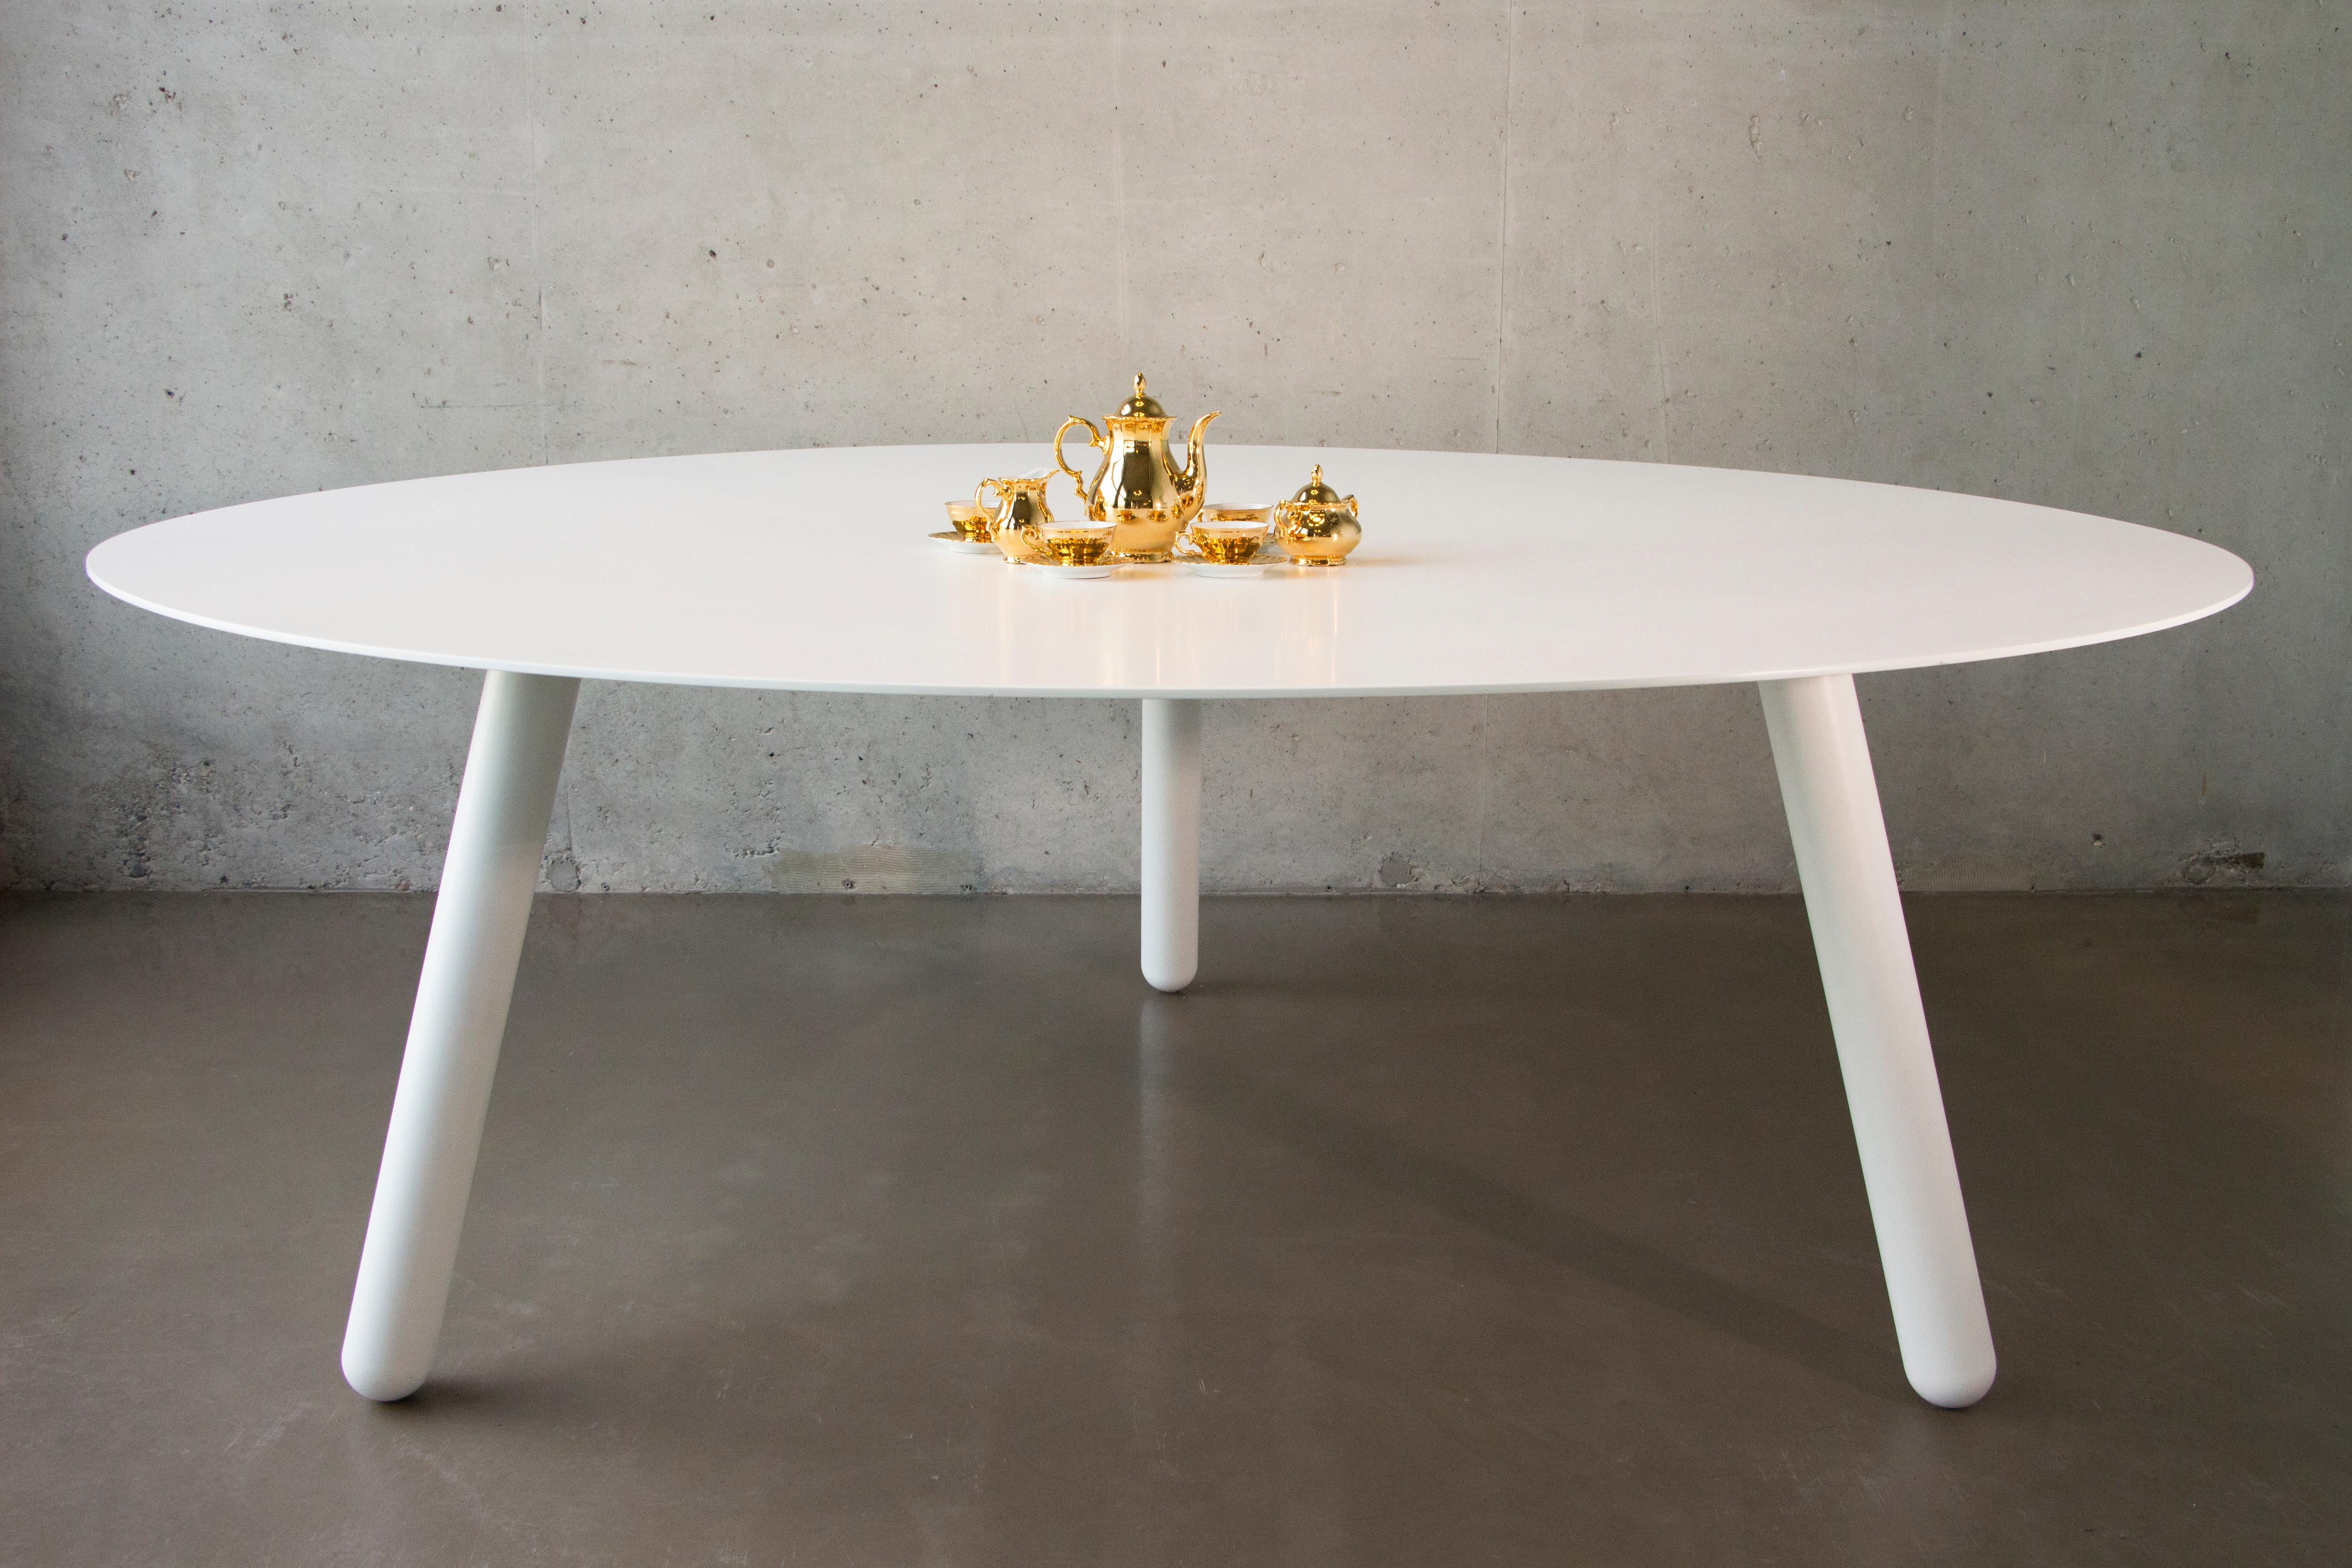 Sphaera table
Design: Jesse Visser
Material: Aluminium
Dimensions: 200 x 200 x 77 cm (L x D x H)

Sphaera is a large, round aluminium table with a diameter of 200 cm. The table surface is 6 mm thick and curved, caused by a spectacular